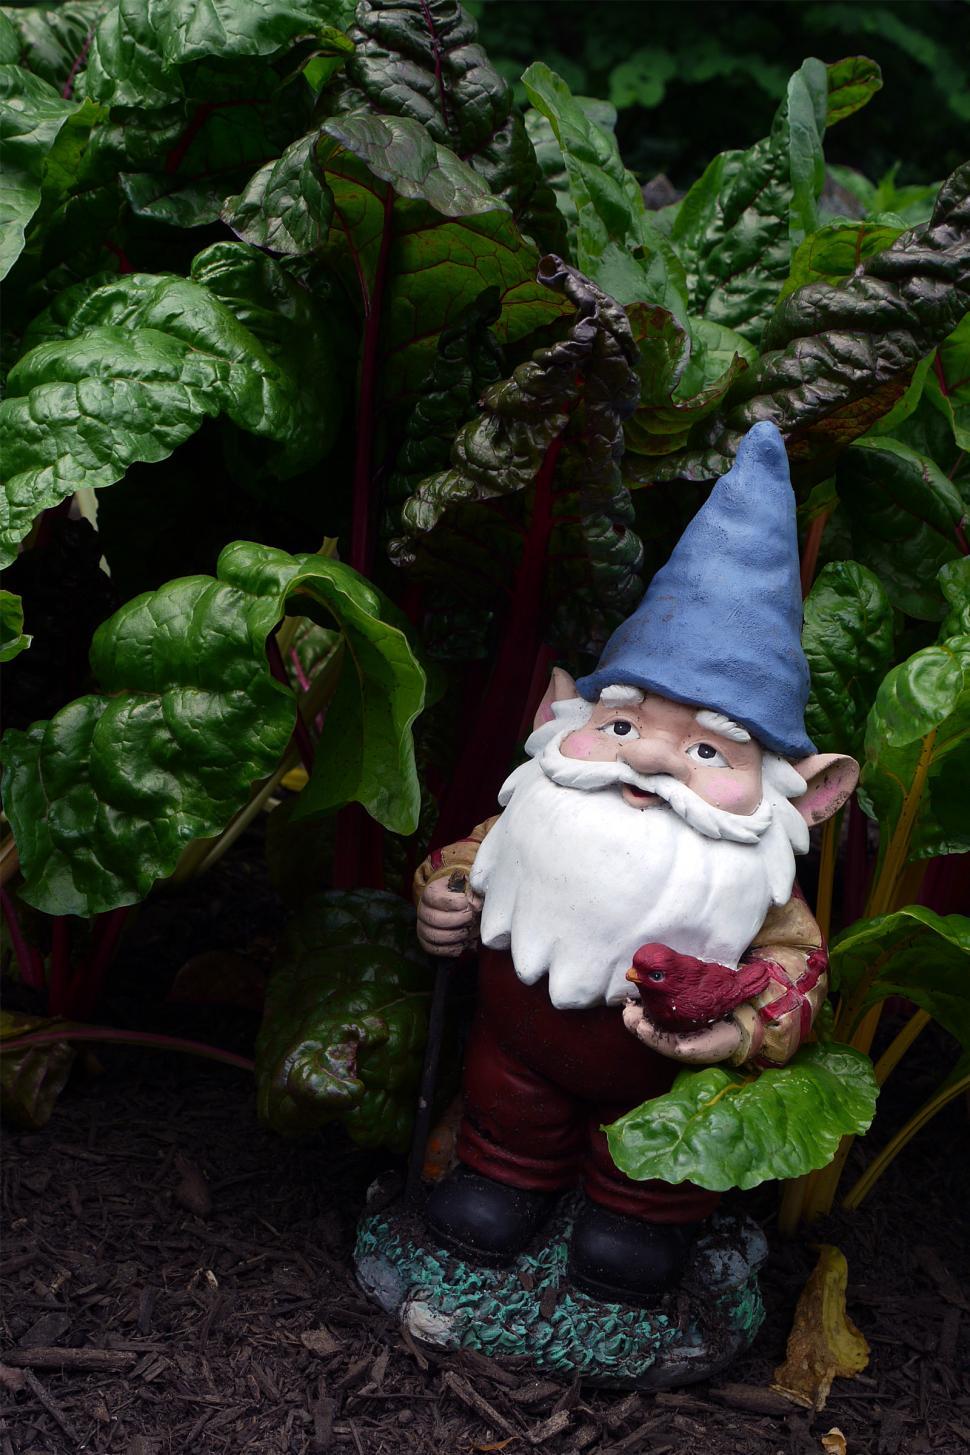 Download Free Stock Photo of Gnome In A Garden 